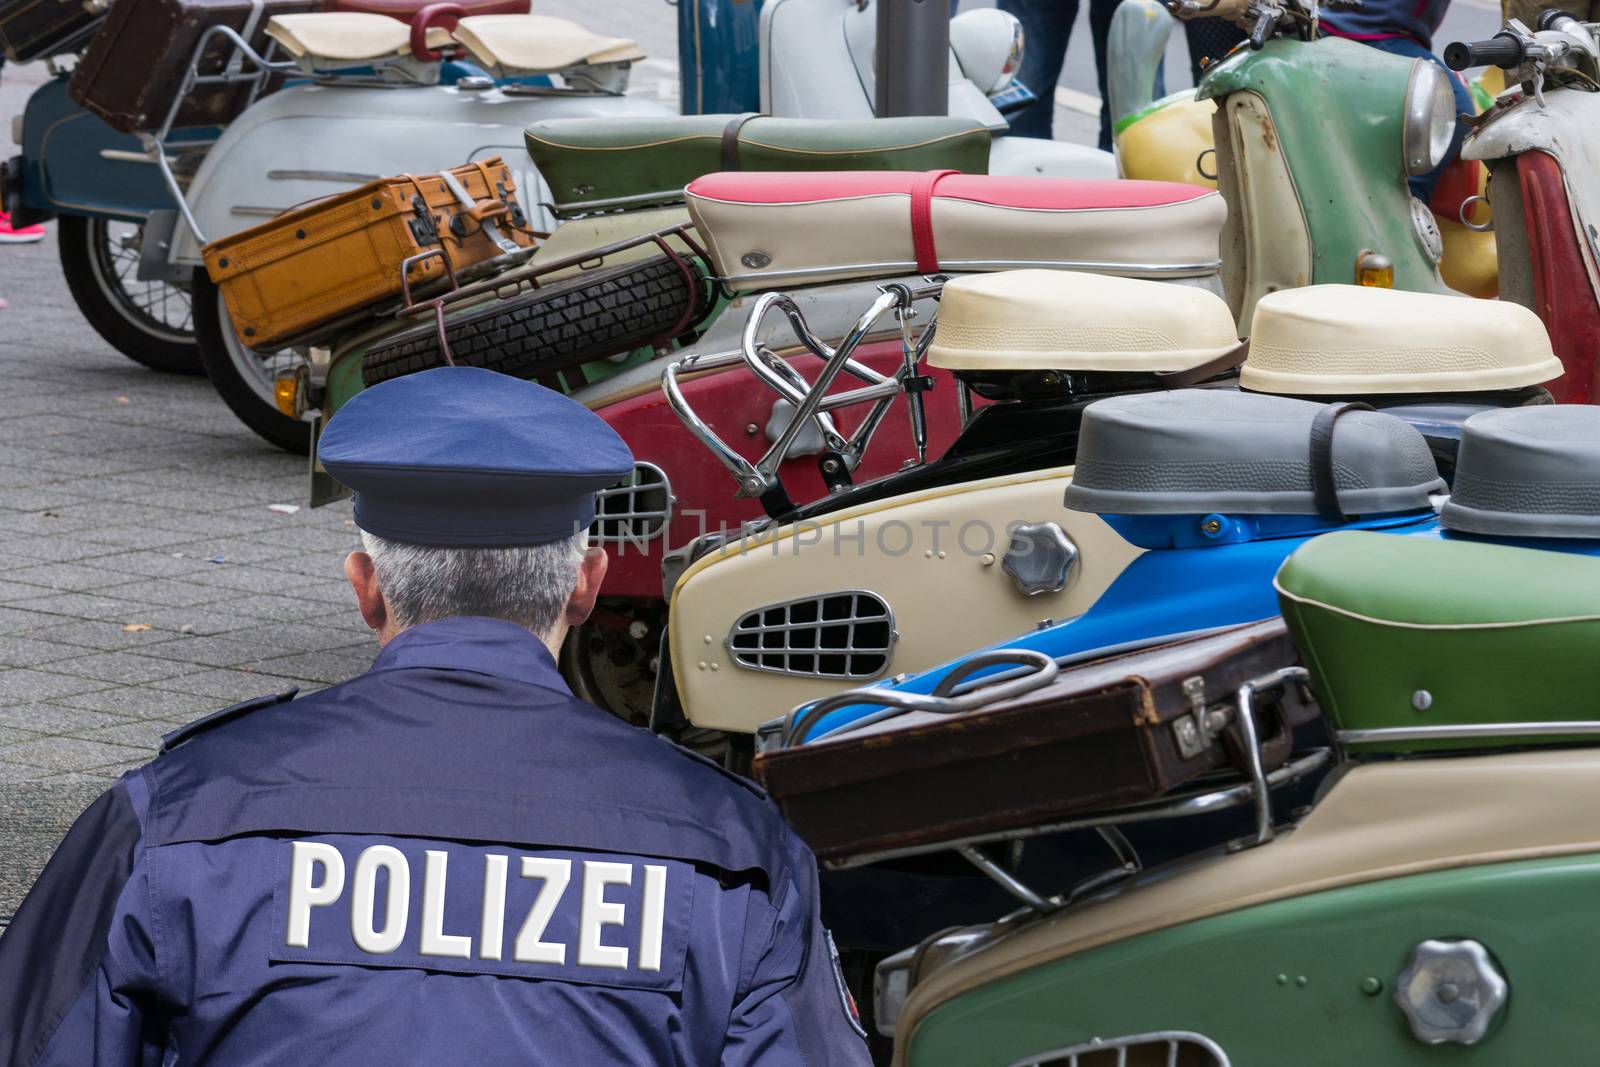 German police, locking and securing a crime scene.